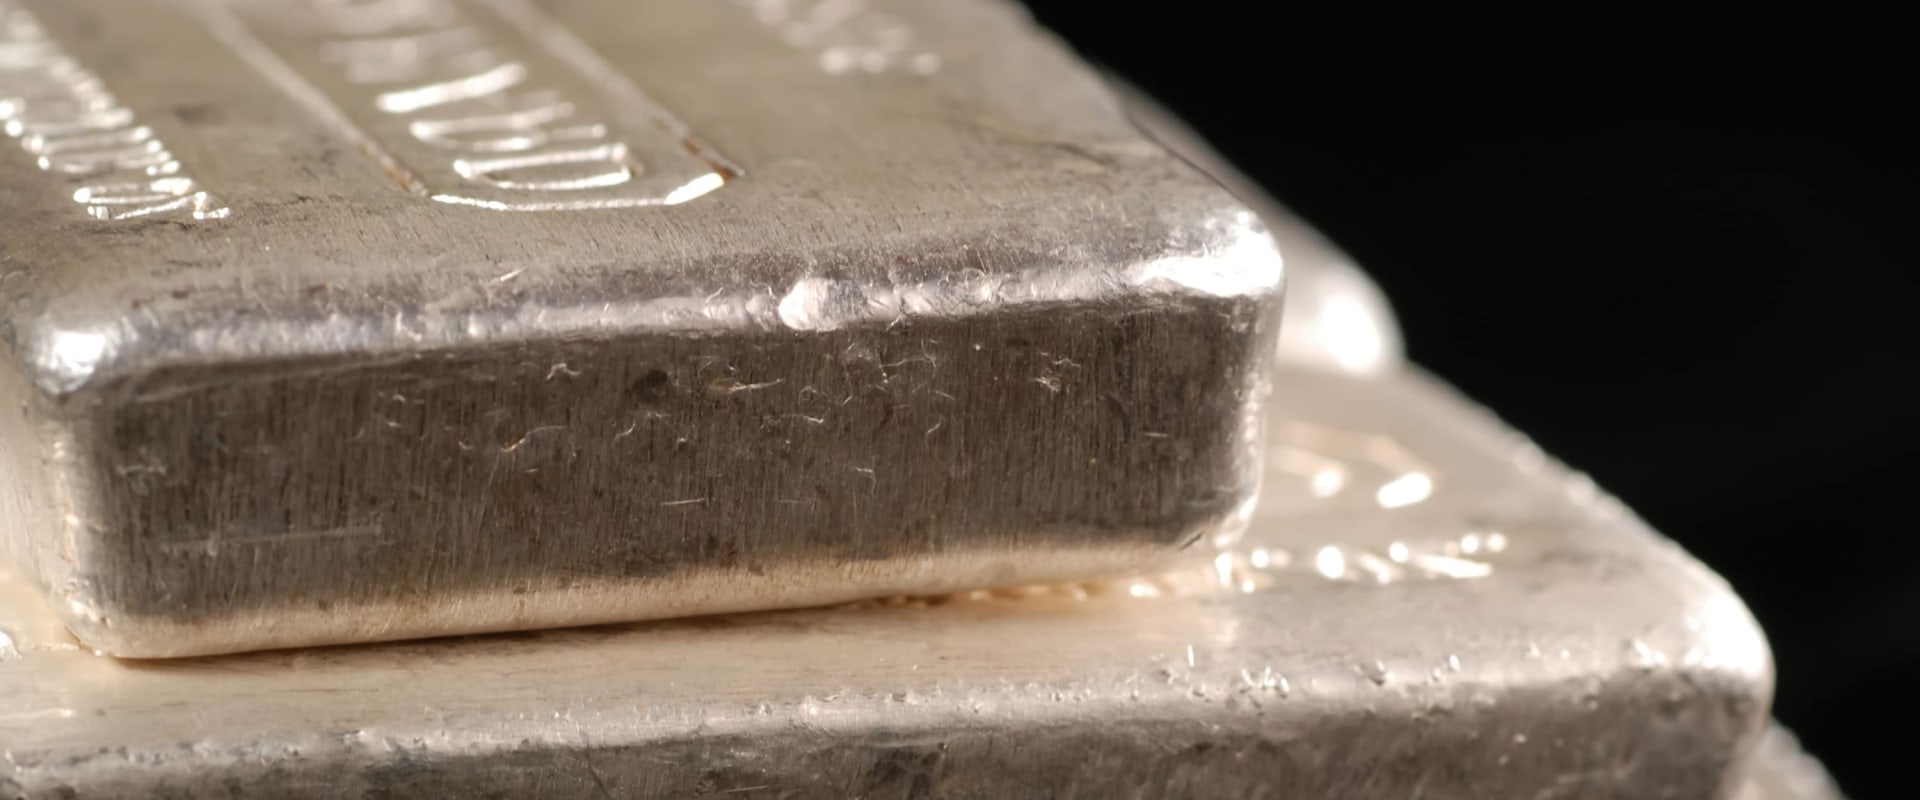 What's the best way to buy silver as an investment?